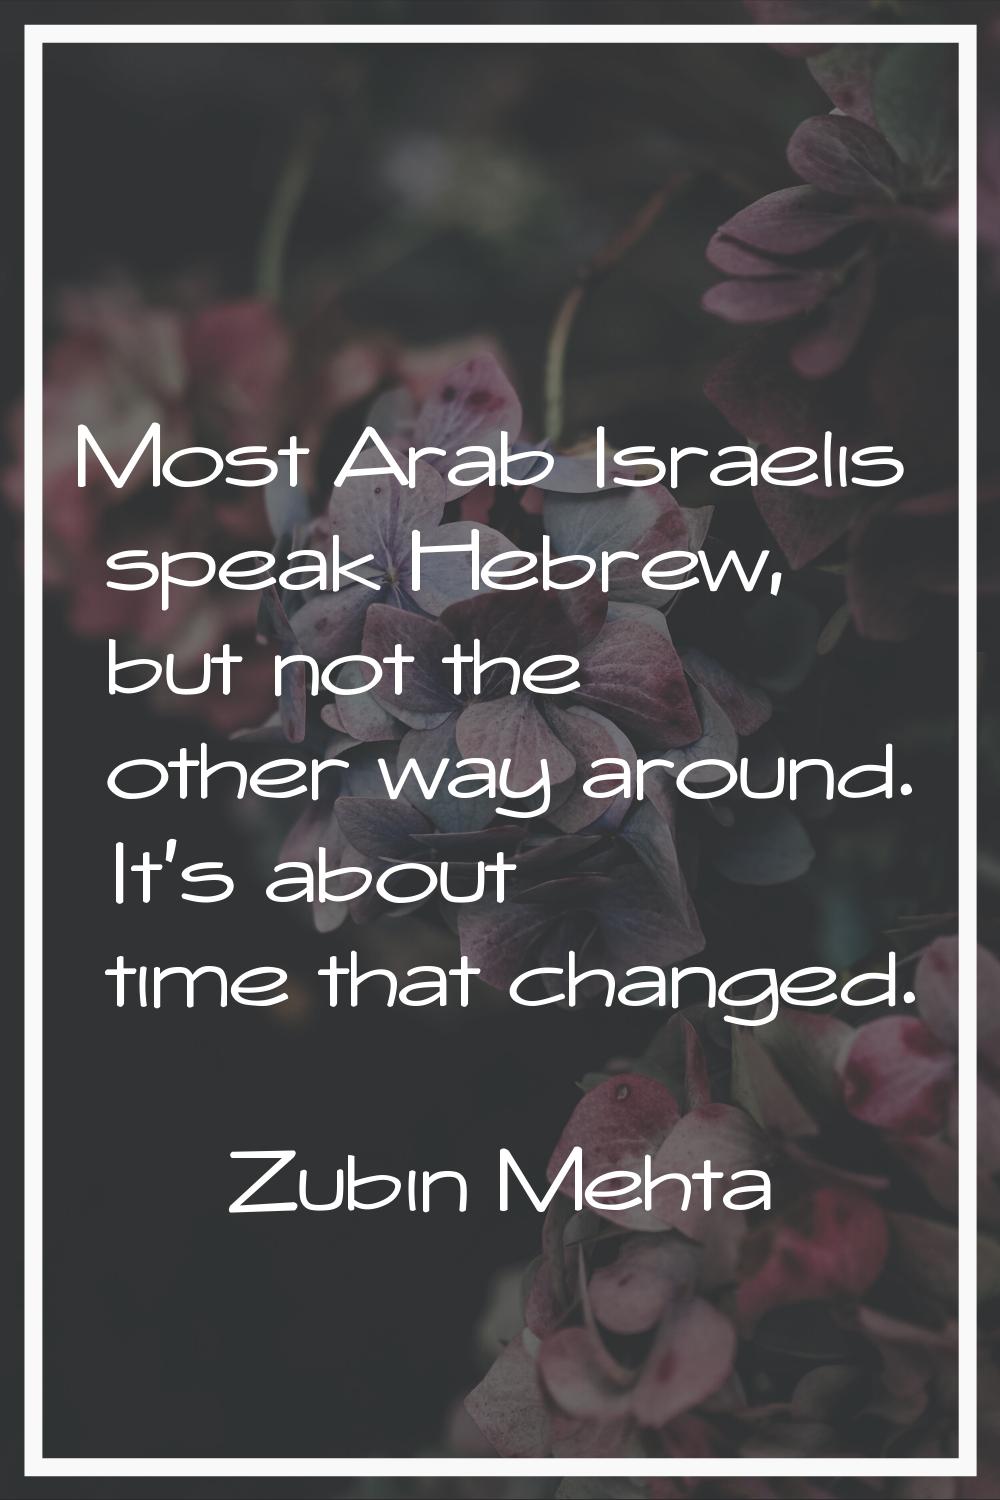 Most Arab Israelis speak Hebrew, but not the other way around. It's about time that changed.